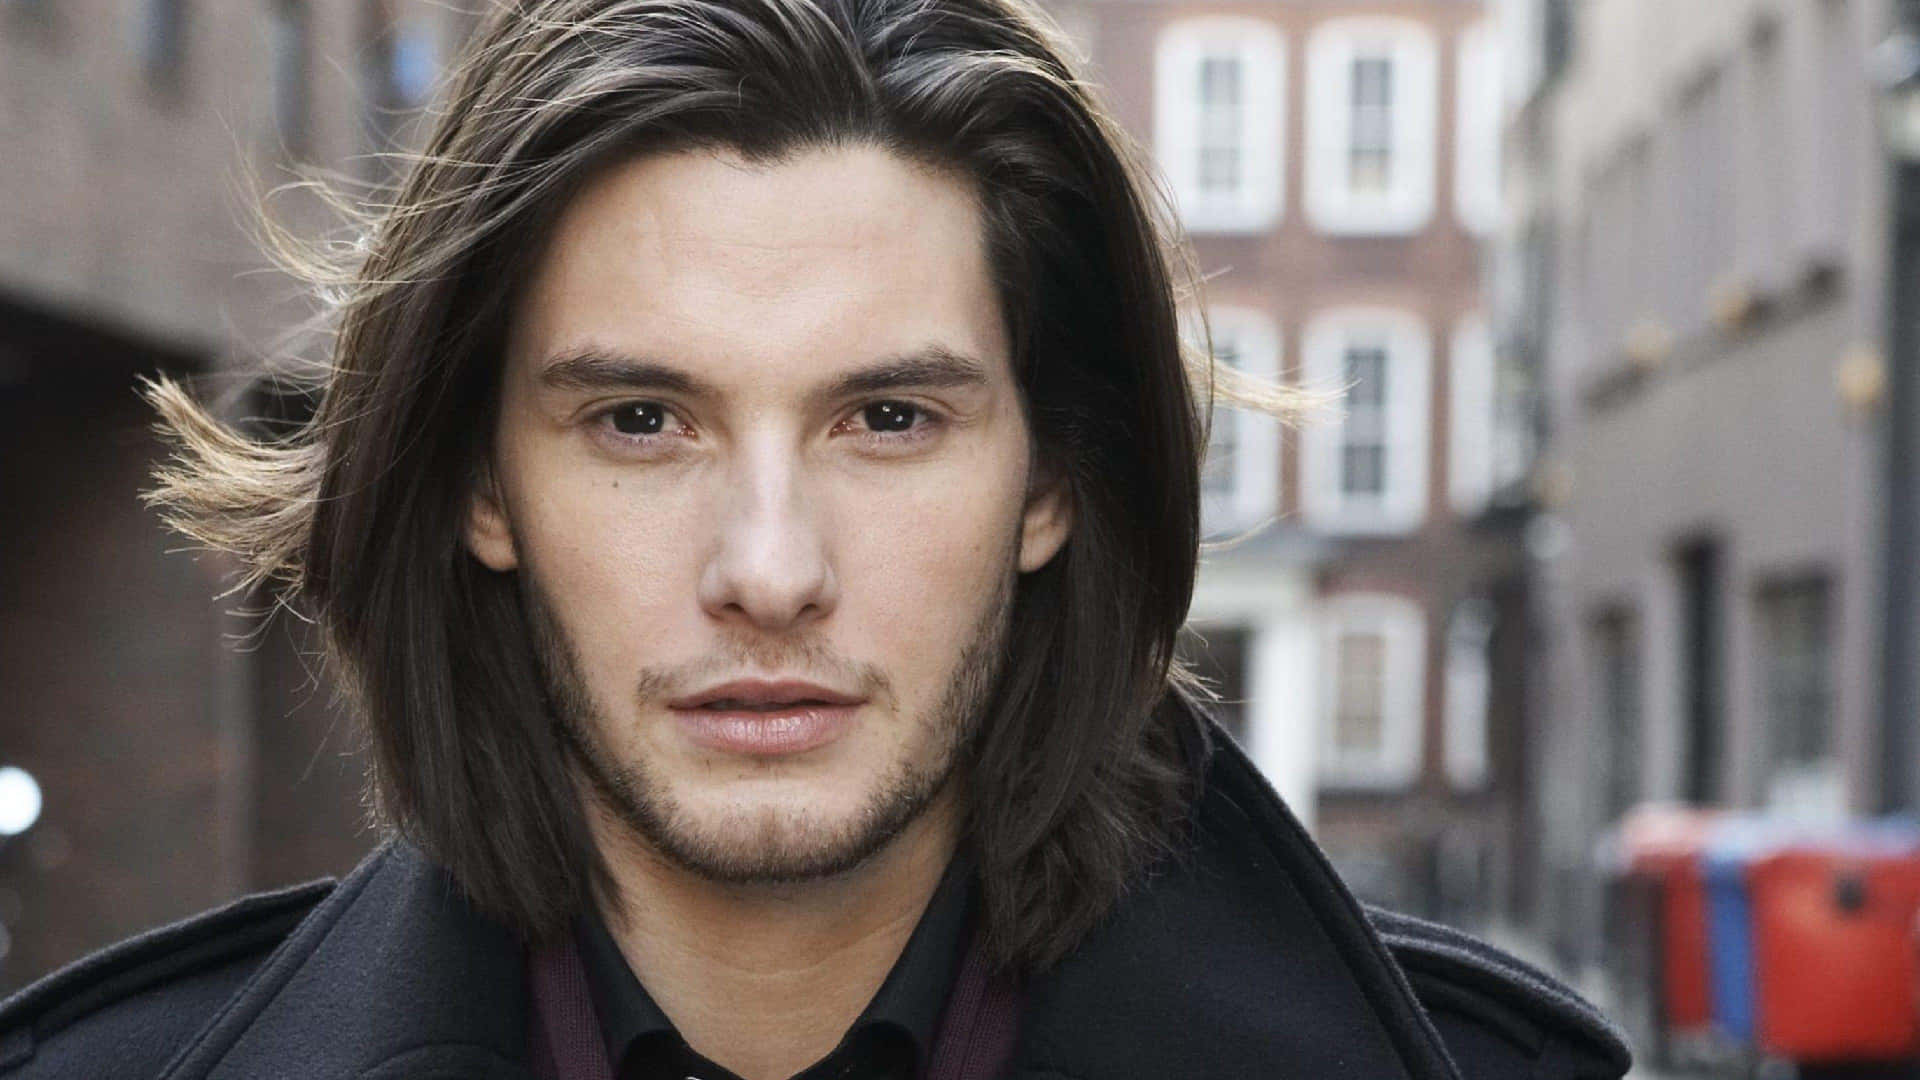 Charming Close-up Of Actor Ben Barnes Background